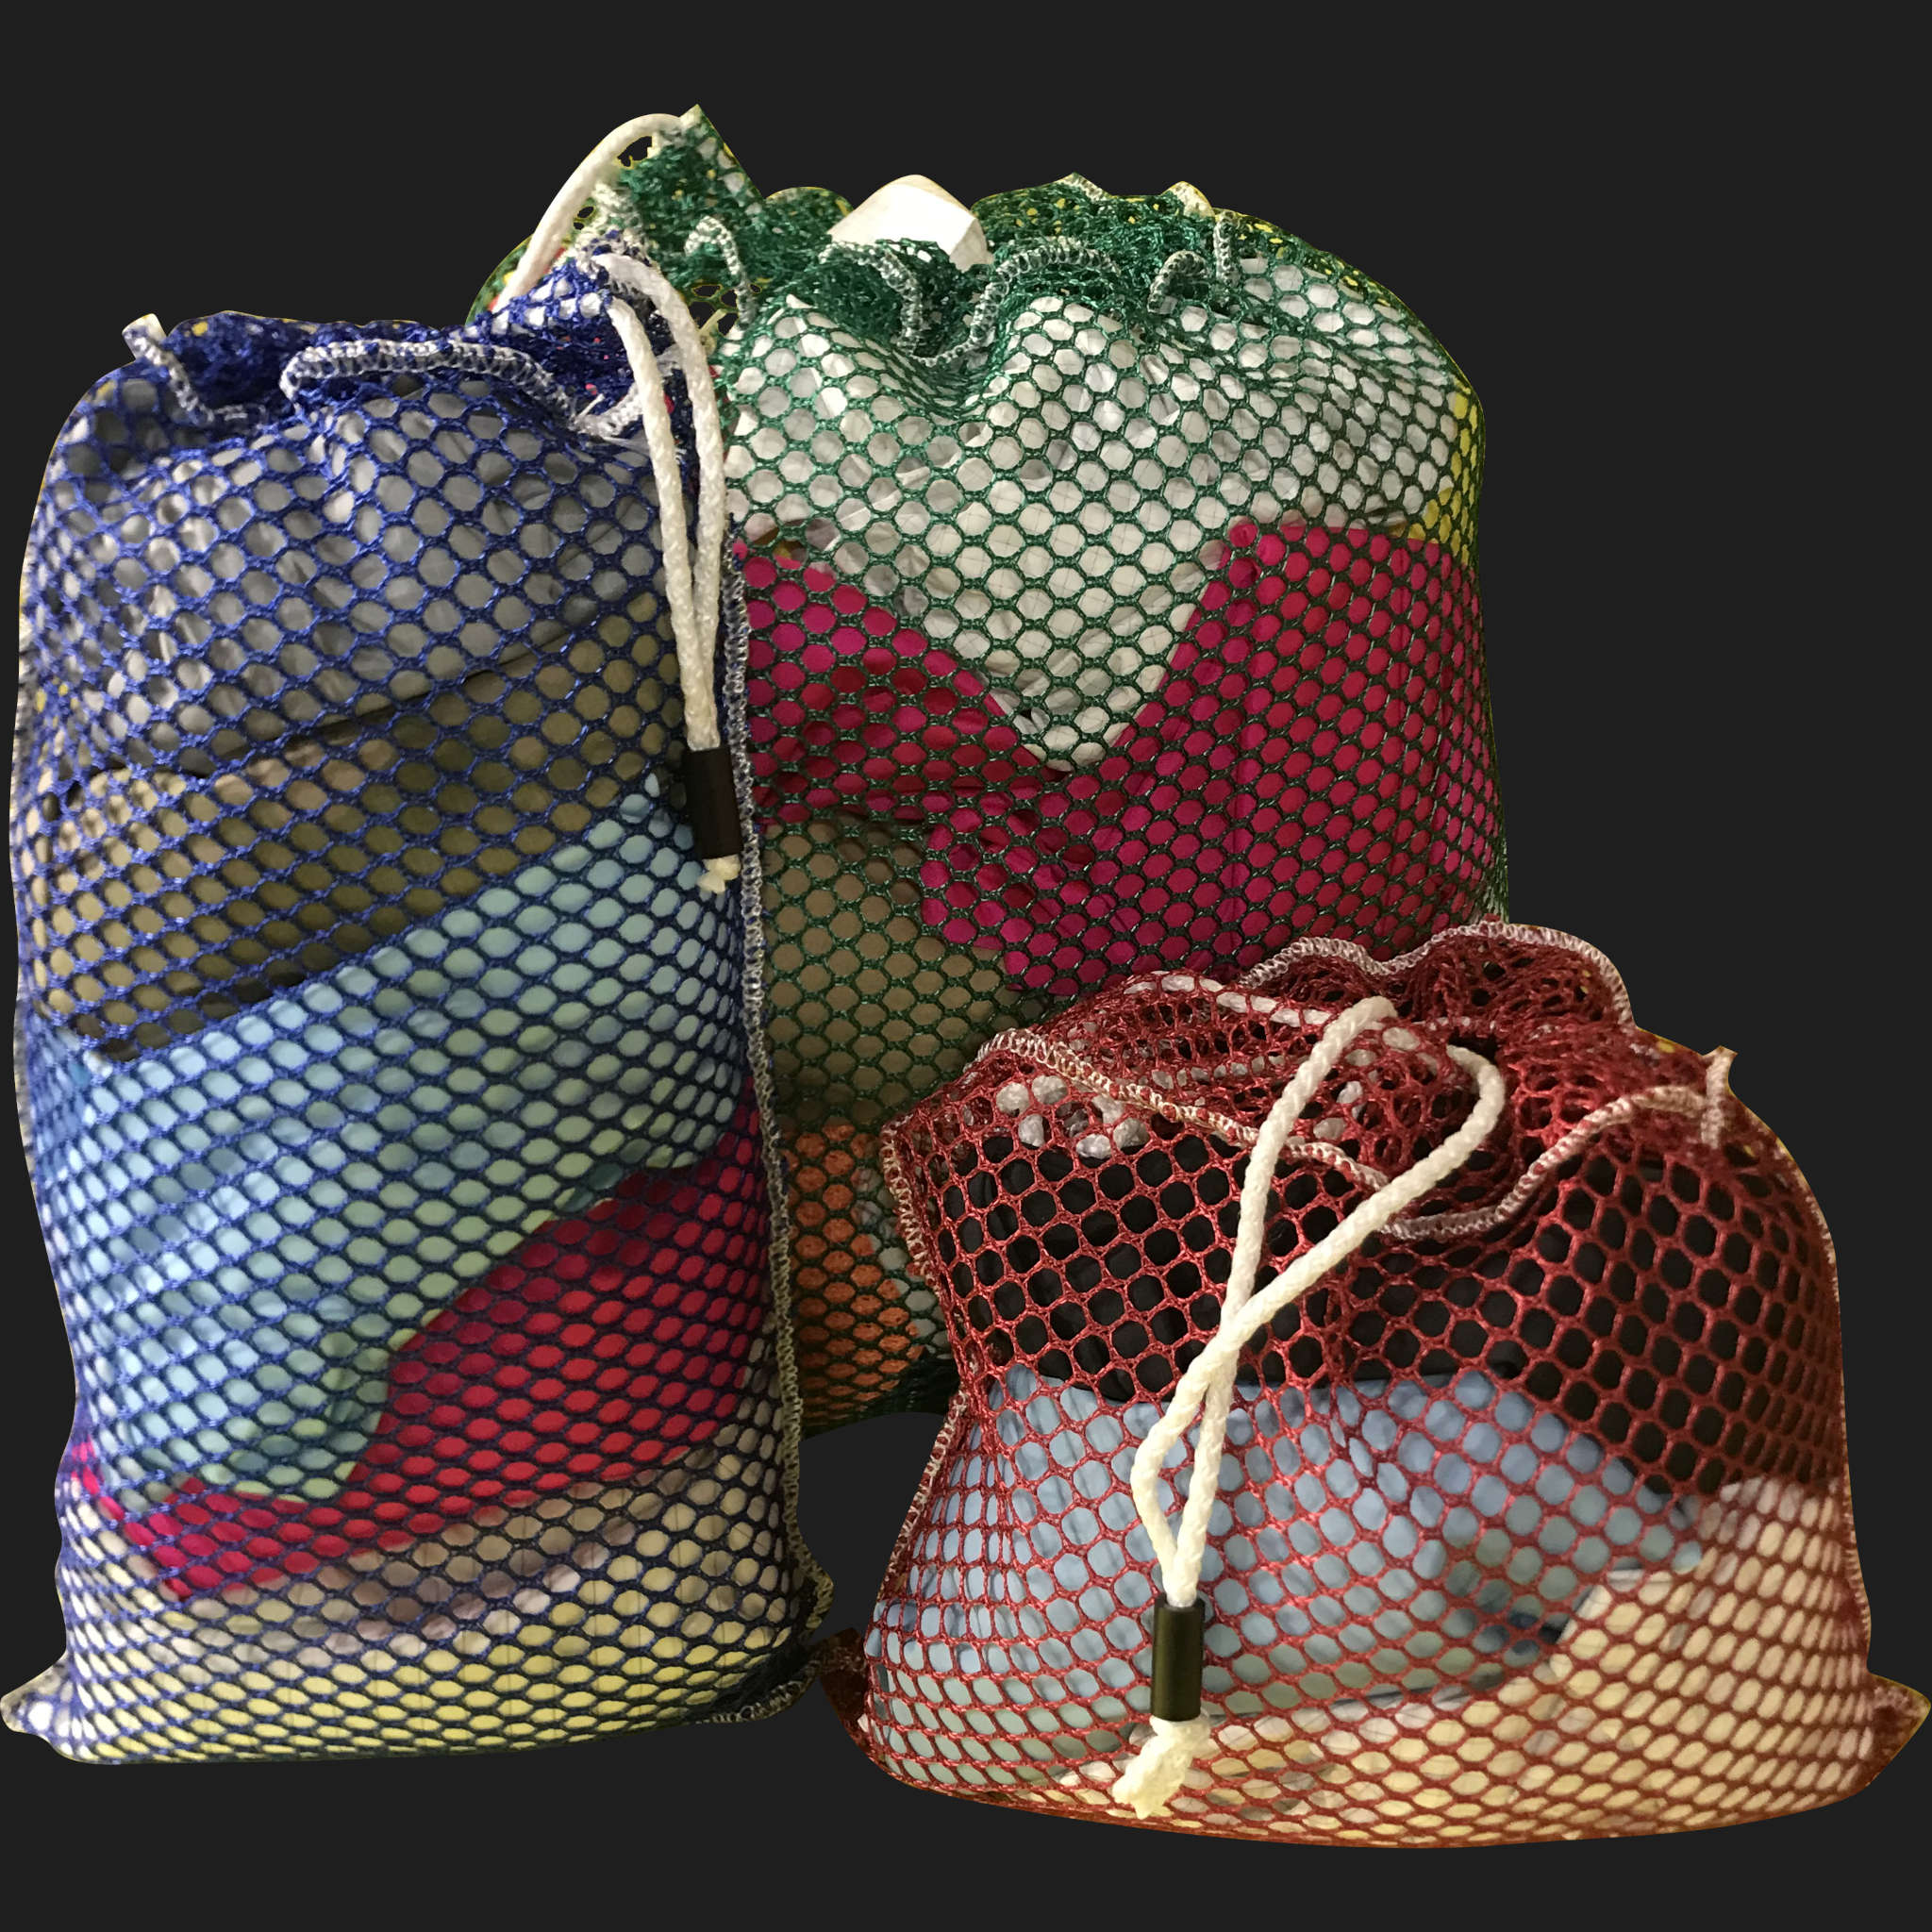 22" x 28" Customized Mesh-Net-Laundry Bags Heavy Duty with Cord and barrellock closure